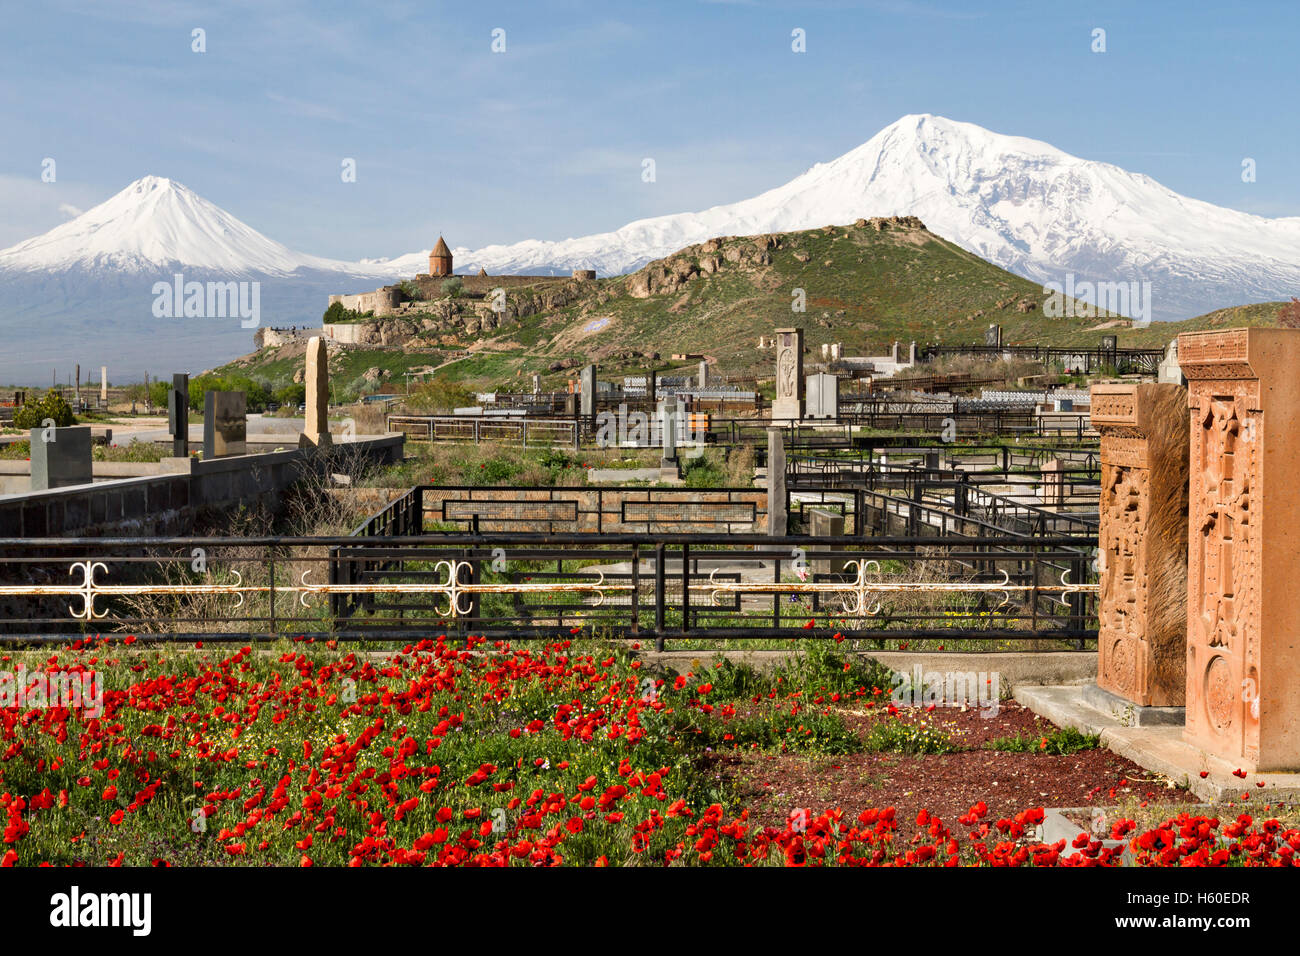 Armenian cemetery with the two peaks of the Mount Ararat in the background. Stock Photo